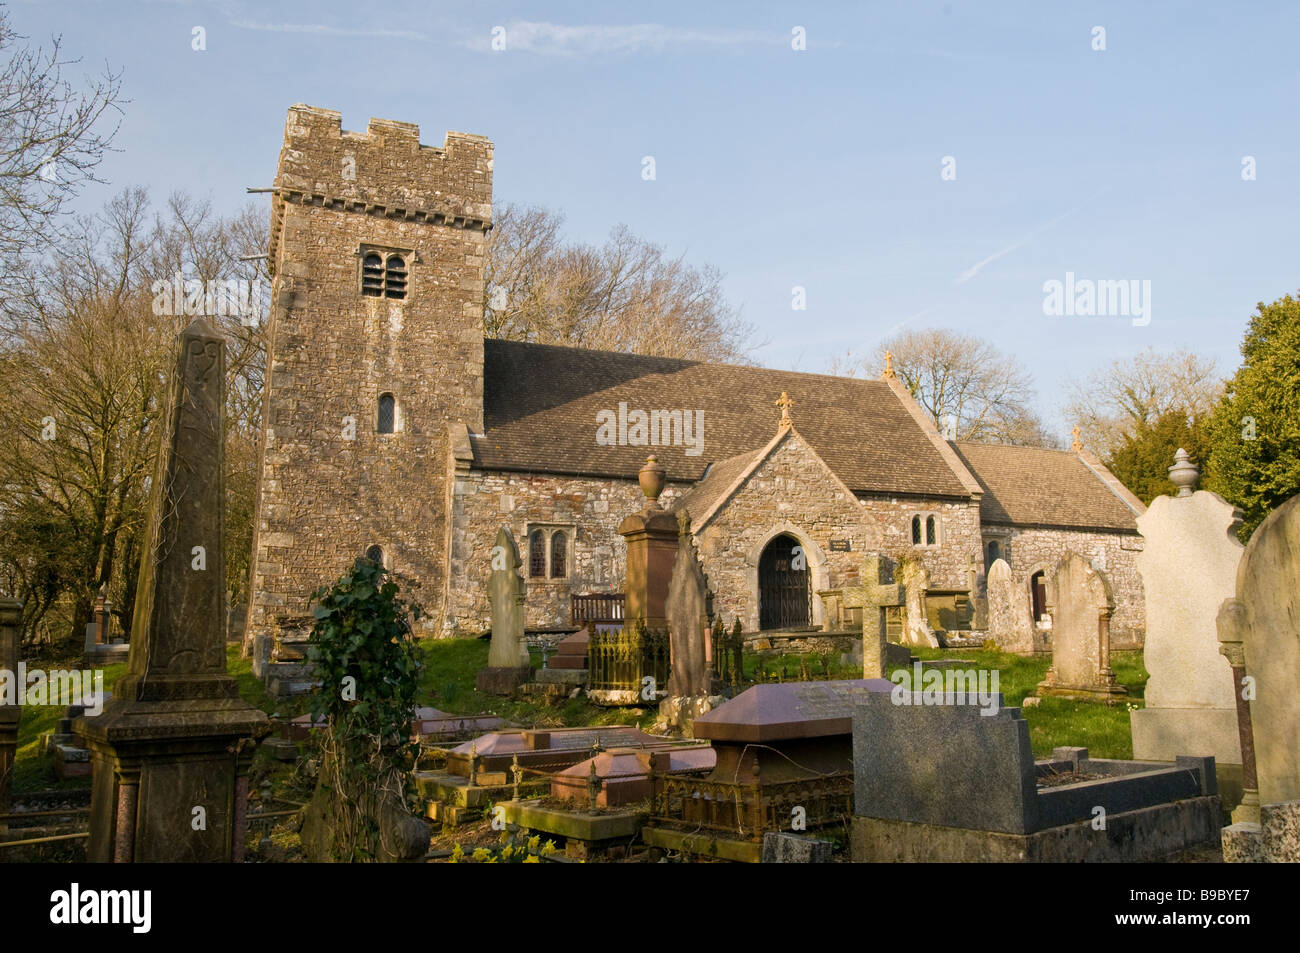 Tiny welsh chiesa parrocchiale di Llanilid nel Vale of Glamorgan Galles Foto Stock